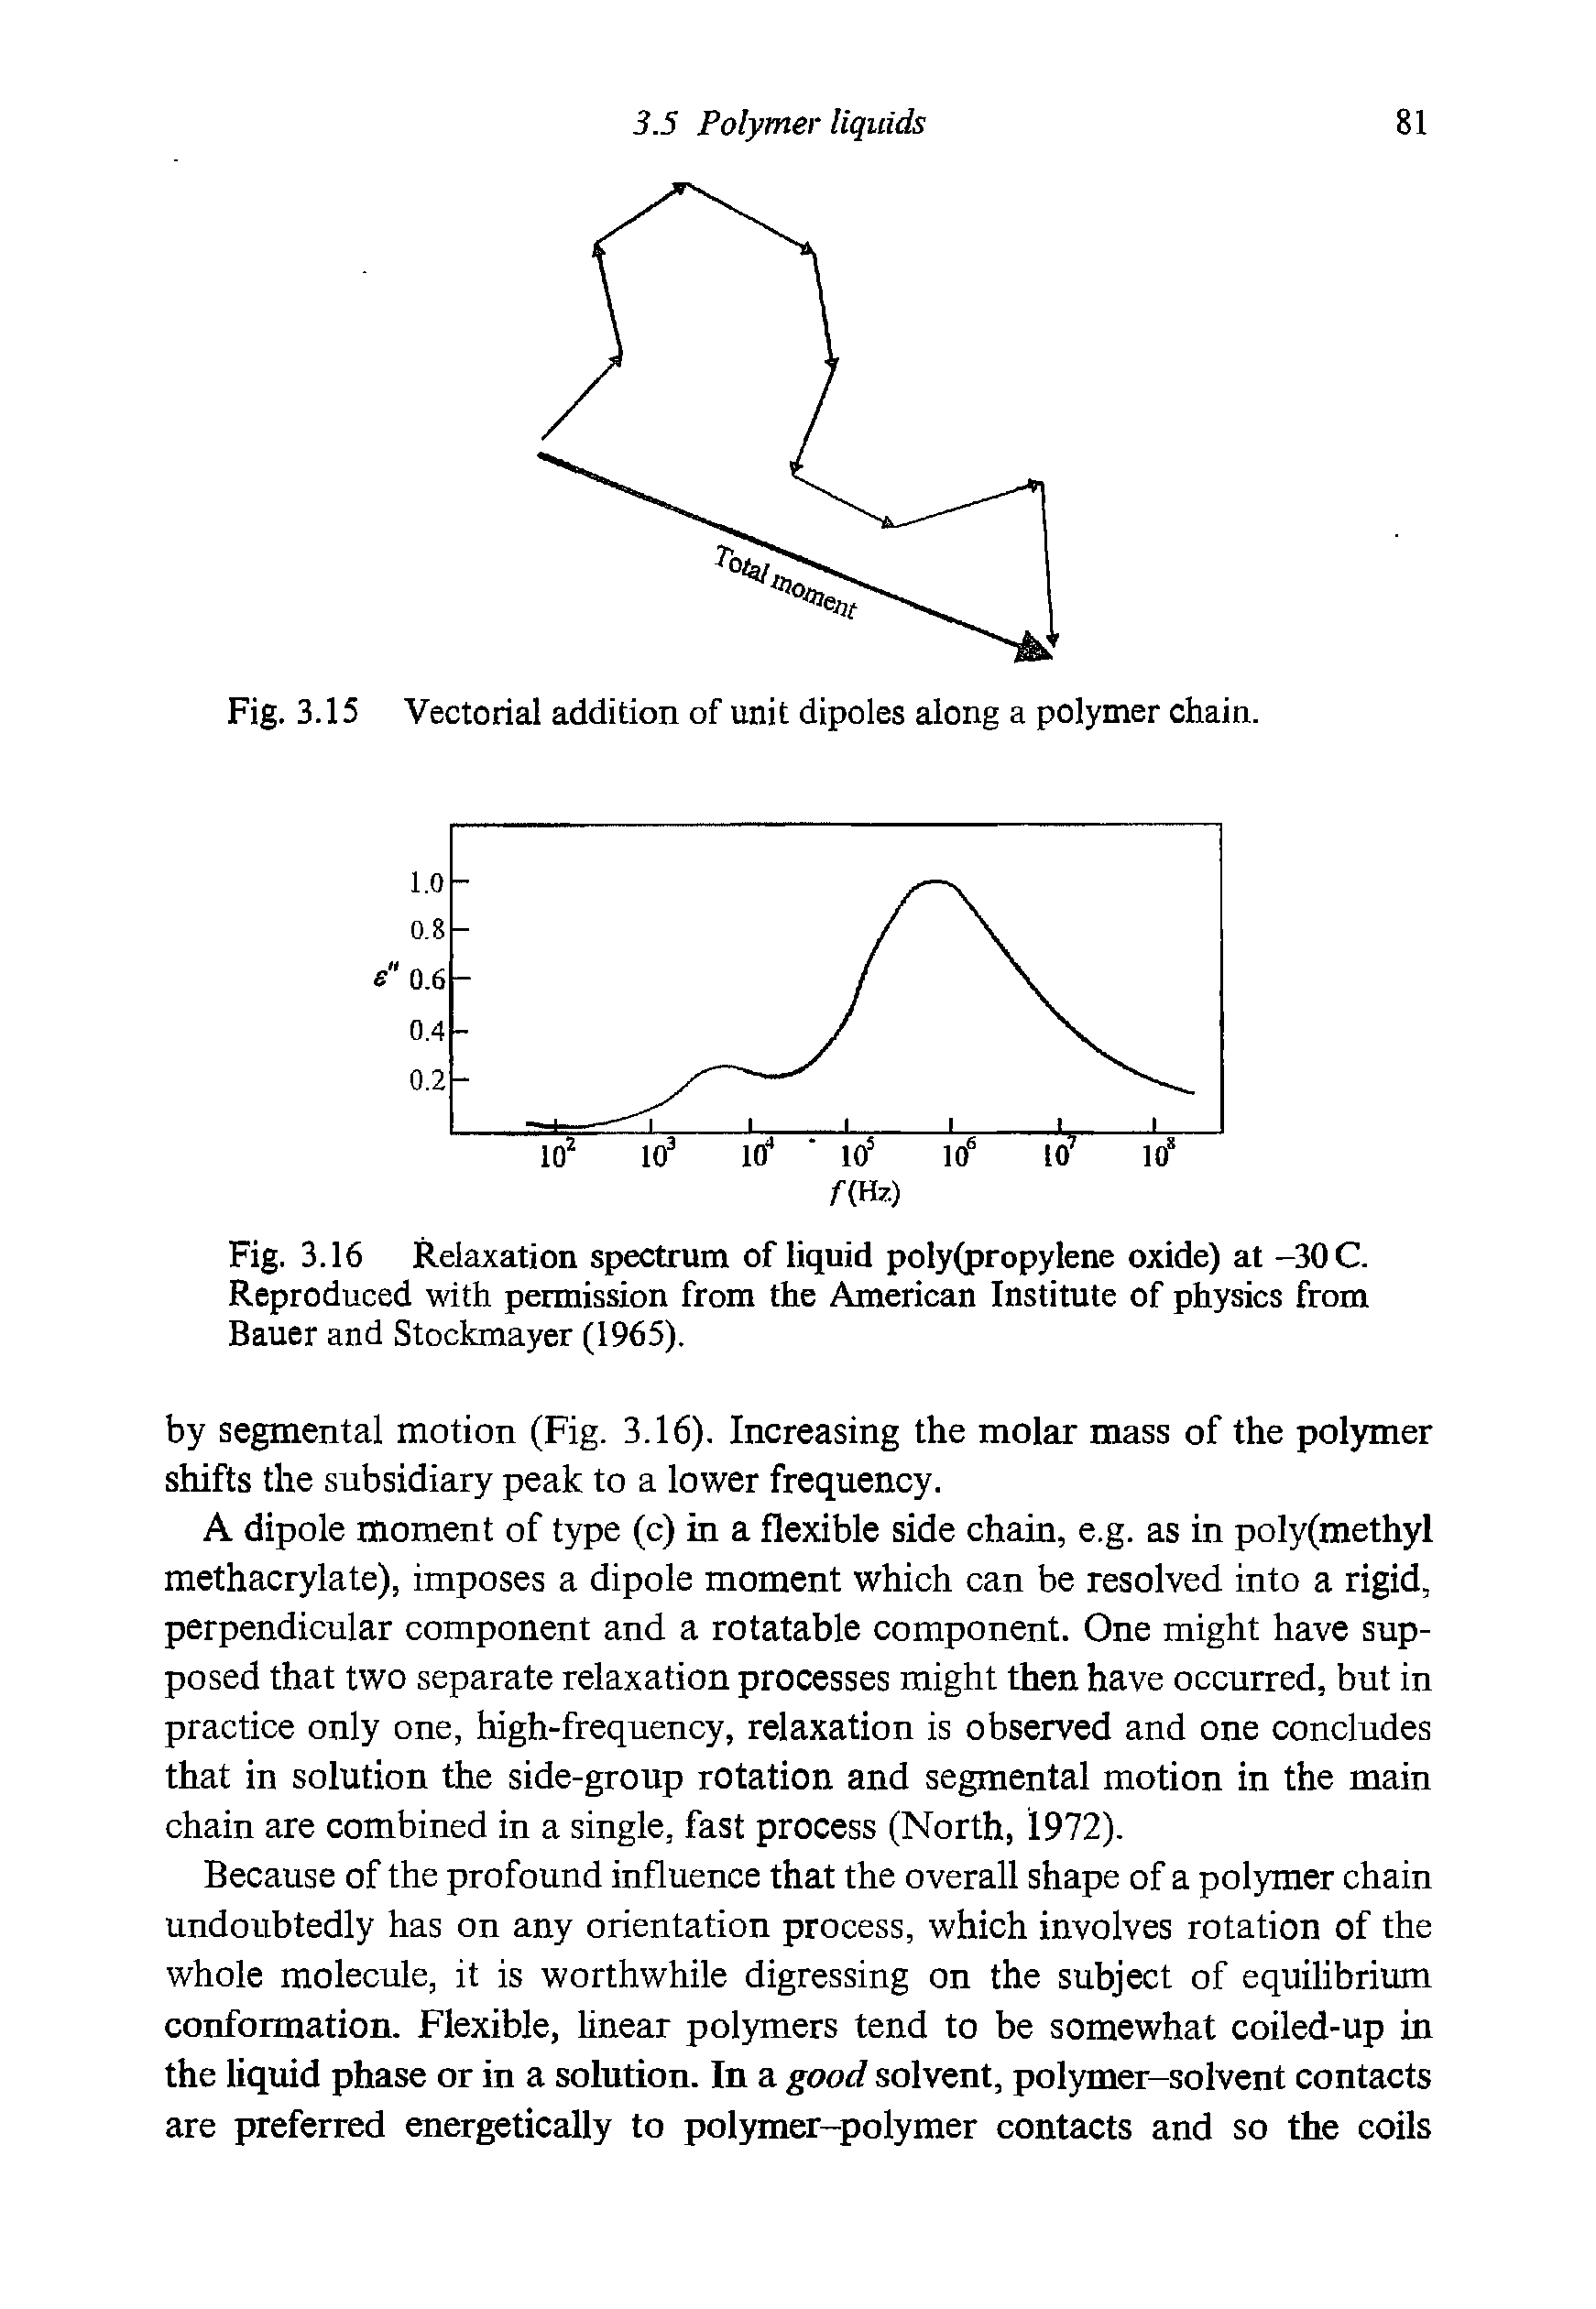 Fig. 3.16 Relaxation spectrum of liquid poly(propylene oxide) at -30 C. Reproduced with permission from the American Institute of physics from Bauer and Stockmayer (1965).